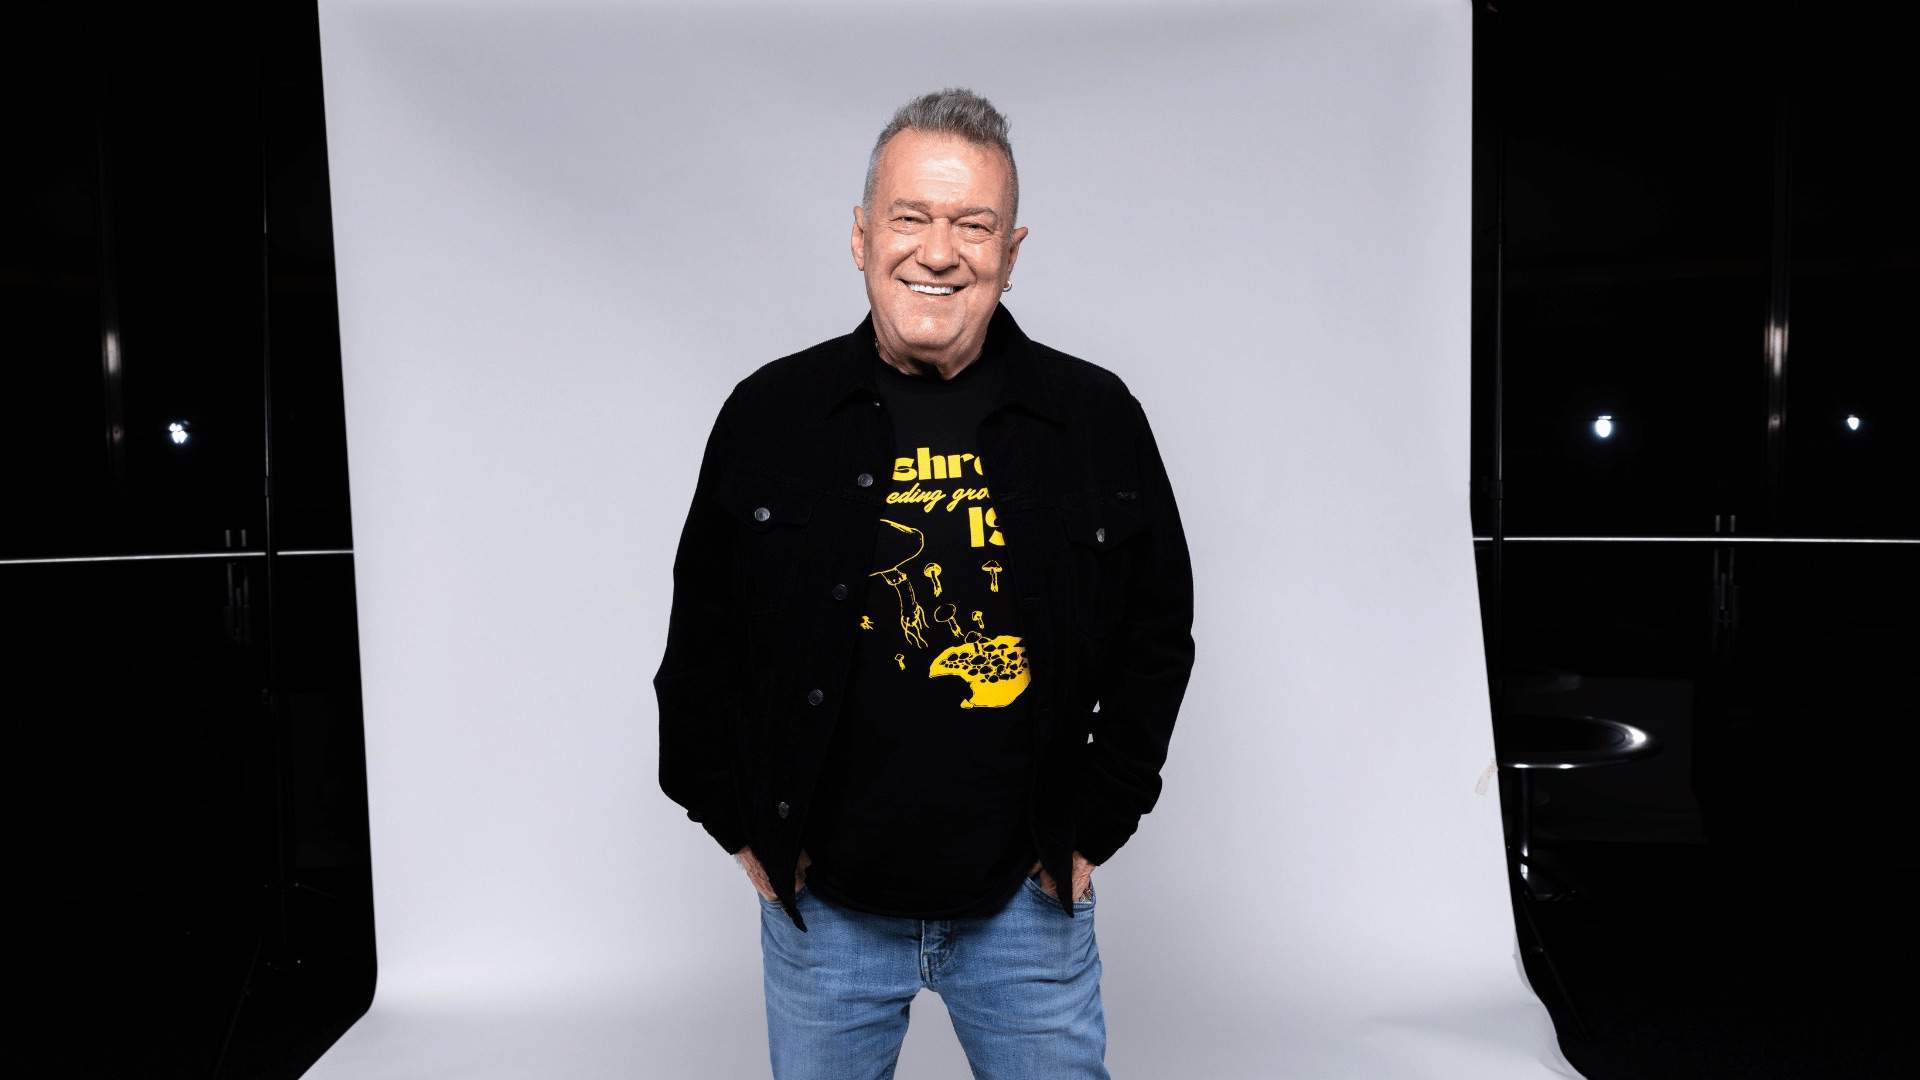 Jimmy Barnes posing in front of a white backdrop.